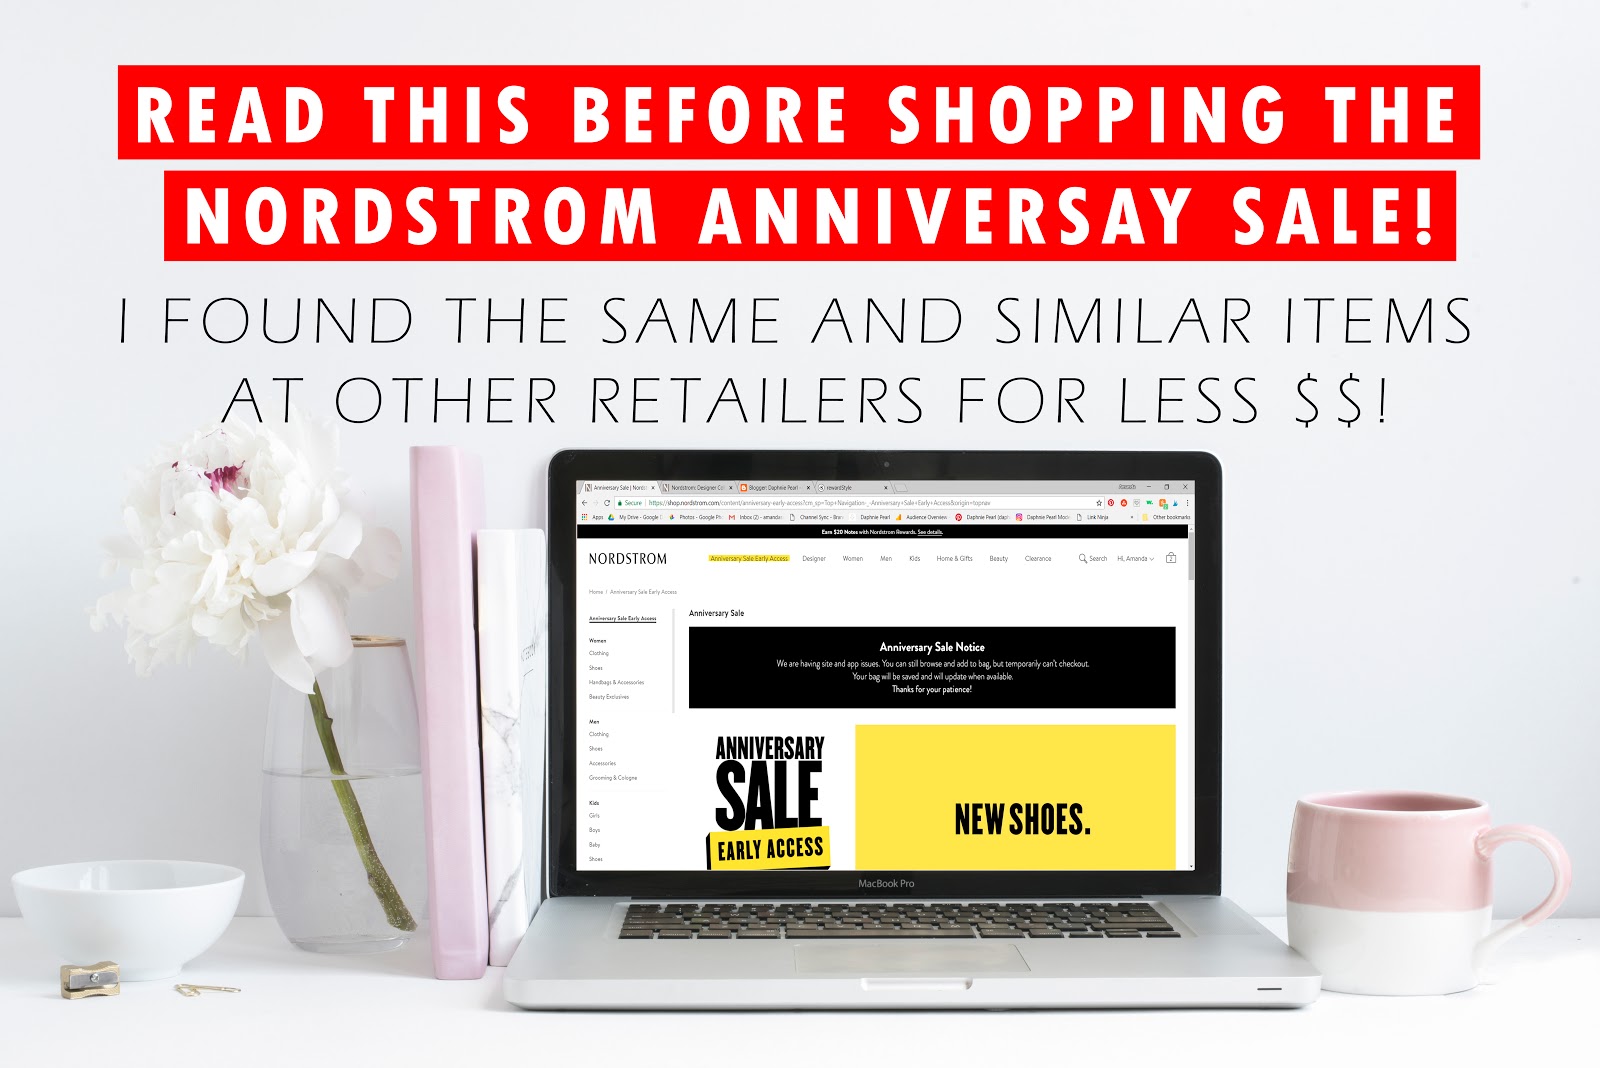 READ THIS BEFORE SHOPPING Nordstrom Anniversary Sale DUPES - Same or Similar Items for Less $! Daphnie's picks and back to school finds from the Nordstrom Anniversary Sale Early Access little girl style tween style inspiration inspo outfit idea outfit ideas shirt shoes shorts denim jeans pants sneakers booties sandals slides ugg boots tshirt tee top sale promotion